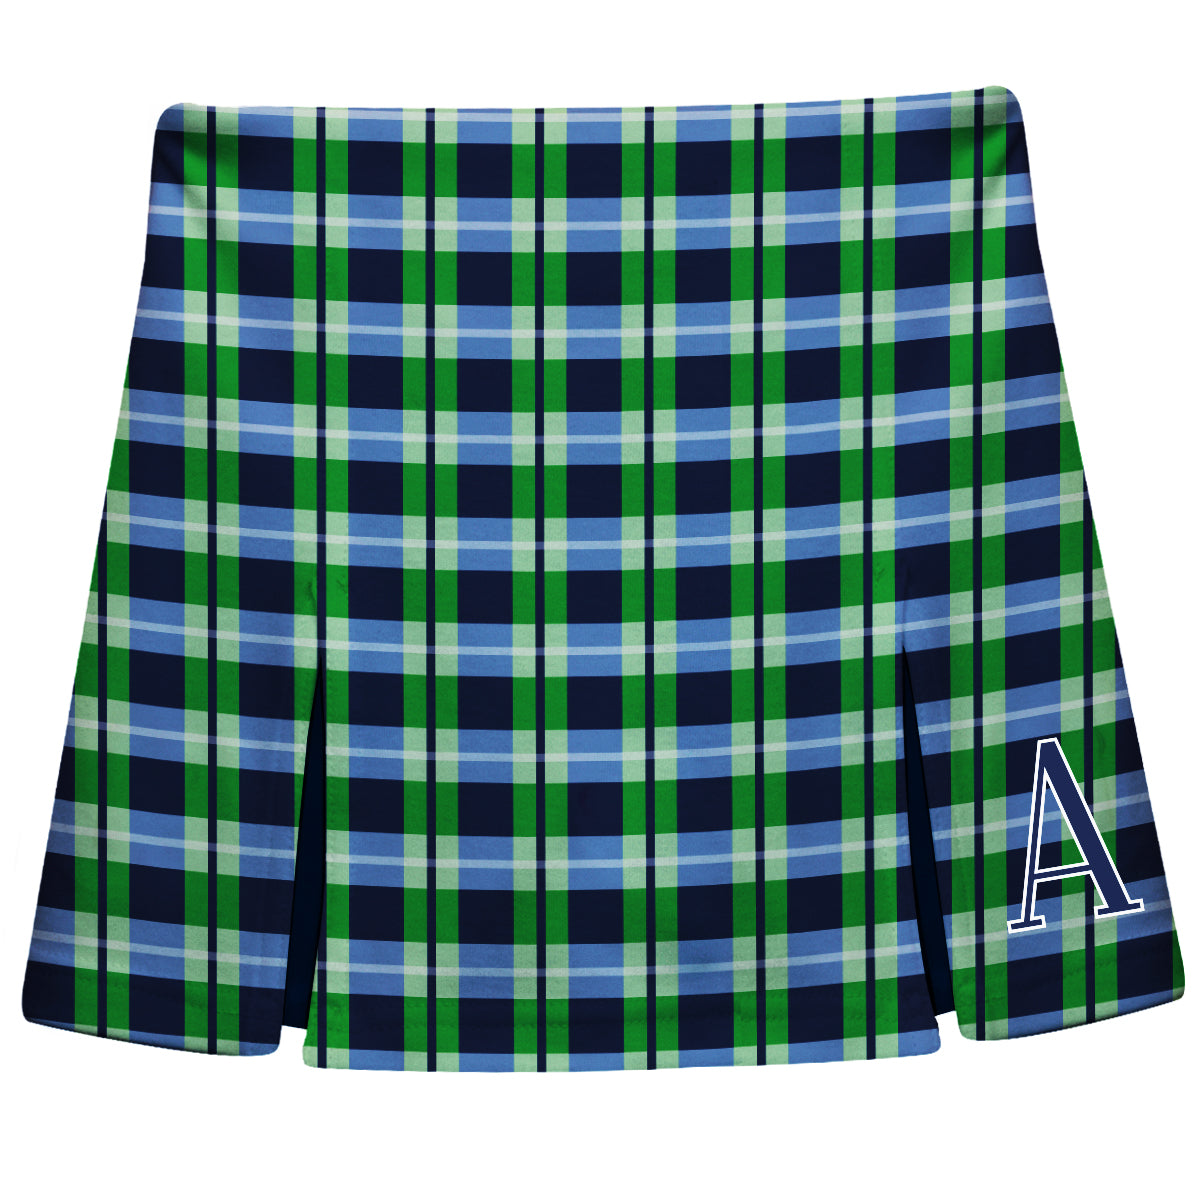 Personalized Initial Name Plaid Navy and Green Skort